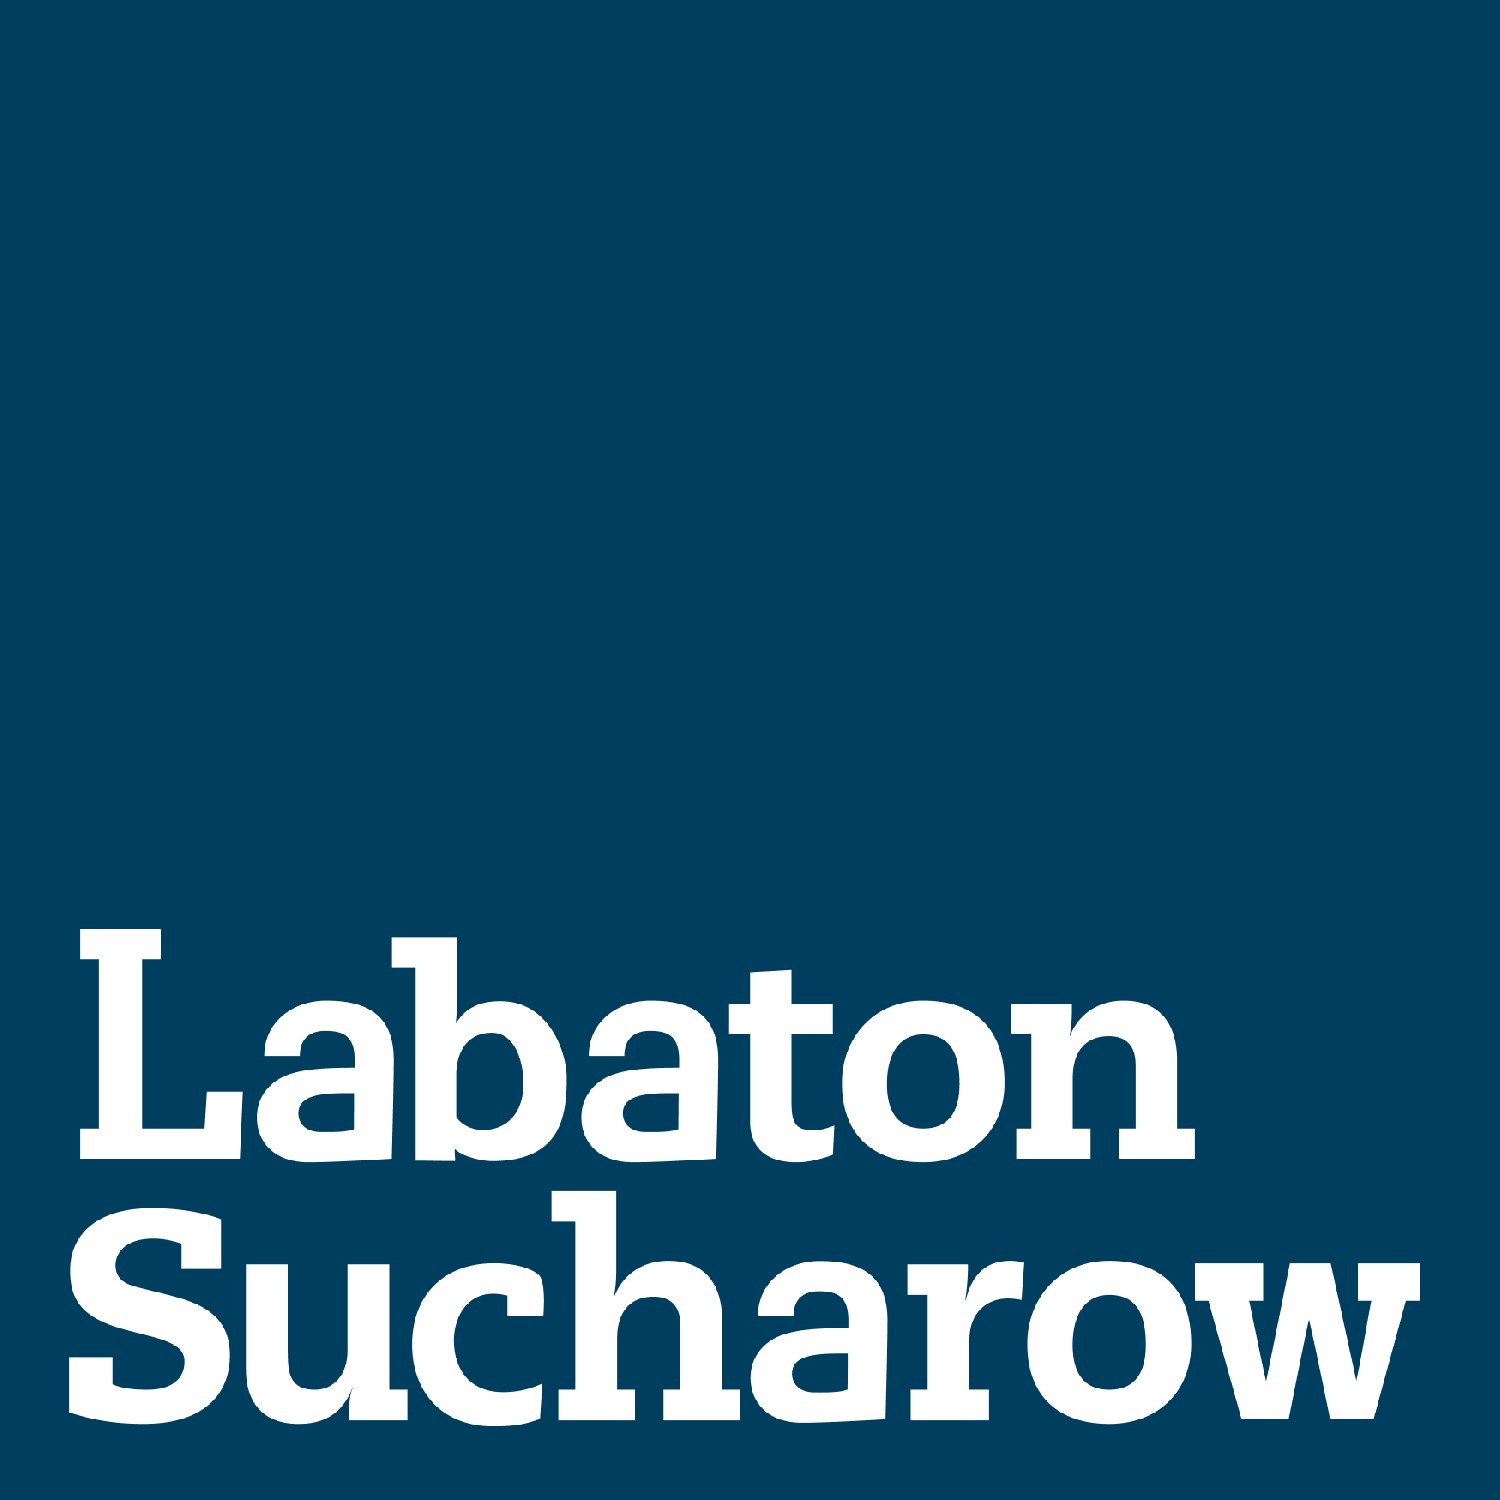 Labaton Sucharow LLP, Friday, May 22, 2020, Press release picture